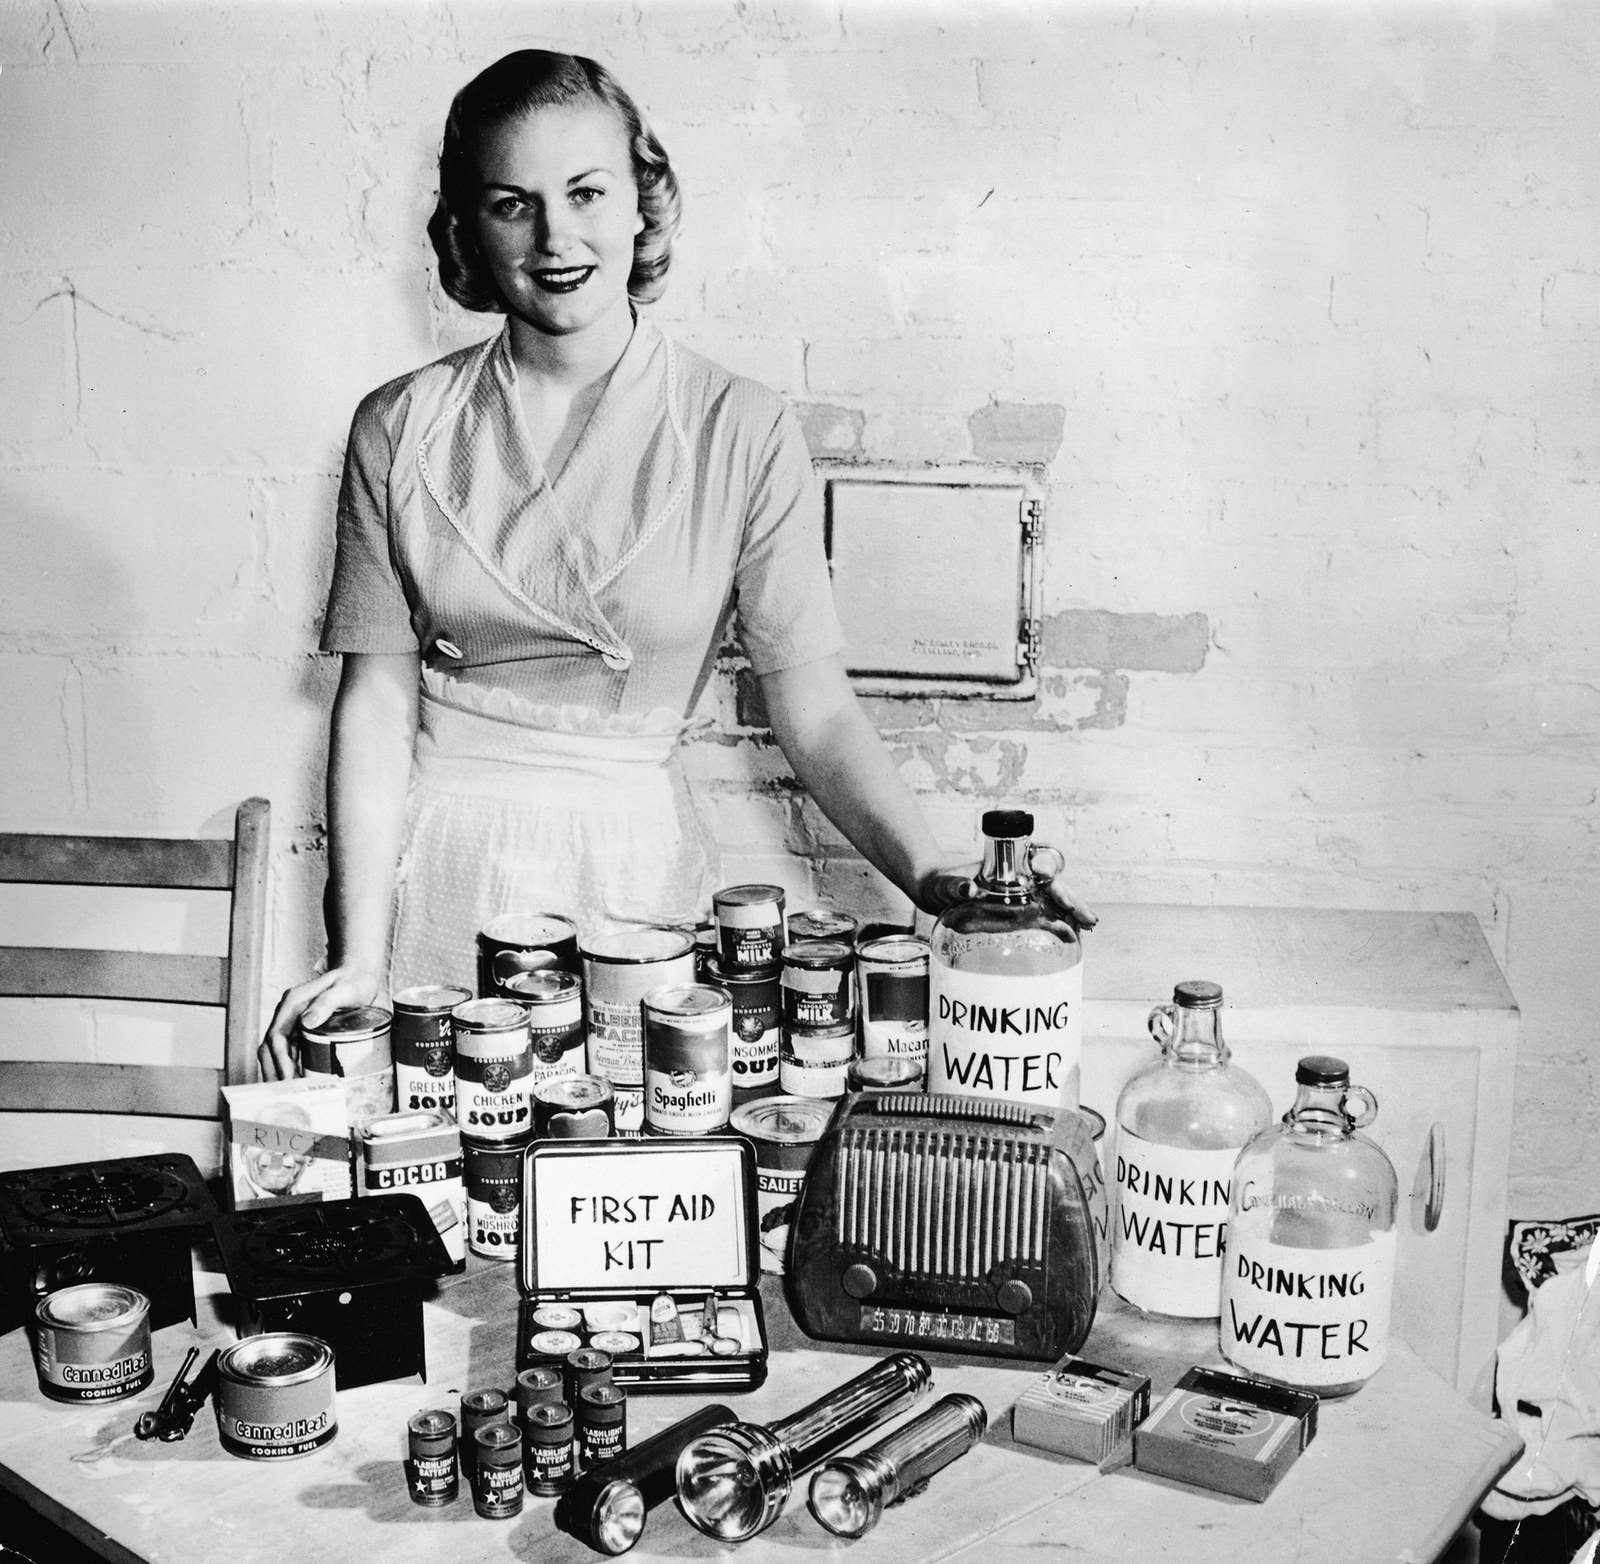 A model poses with a display of bomb shelter supplies in the 1950s.